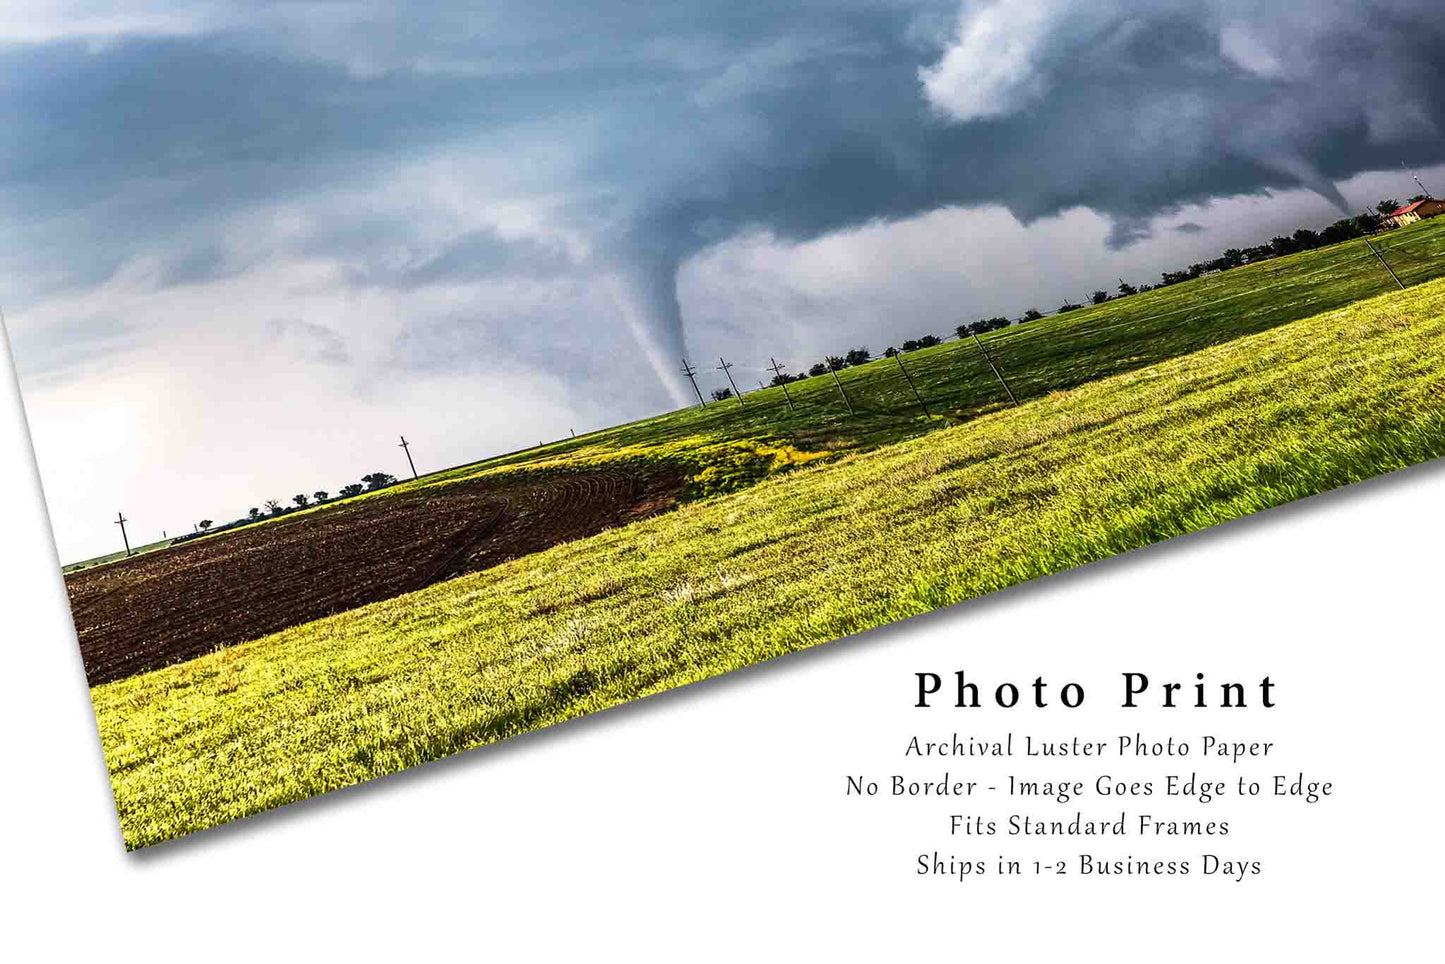 Tornado Photography Print | Storm Picture | Extreme Weather Wall Art | Kansas Photo | Nature Decor | Not Framed